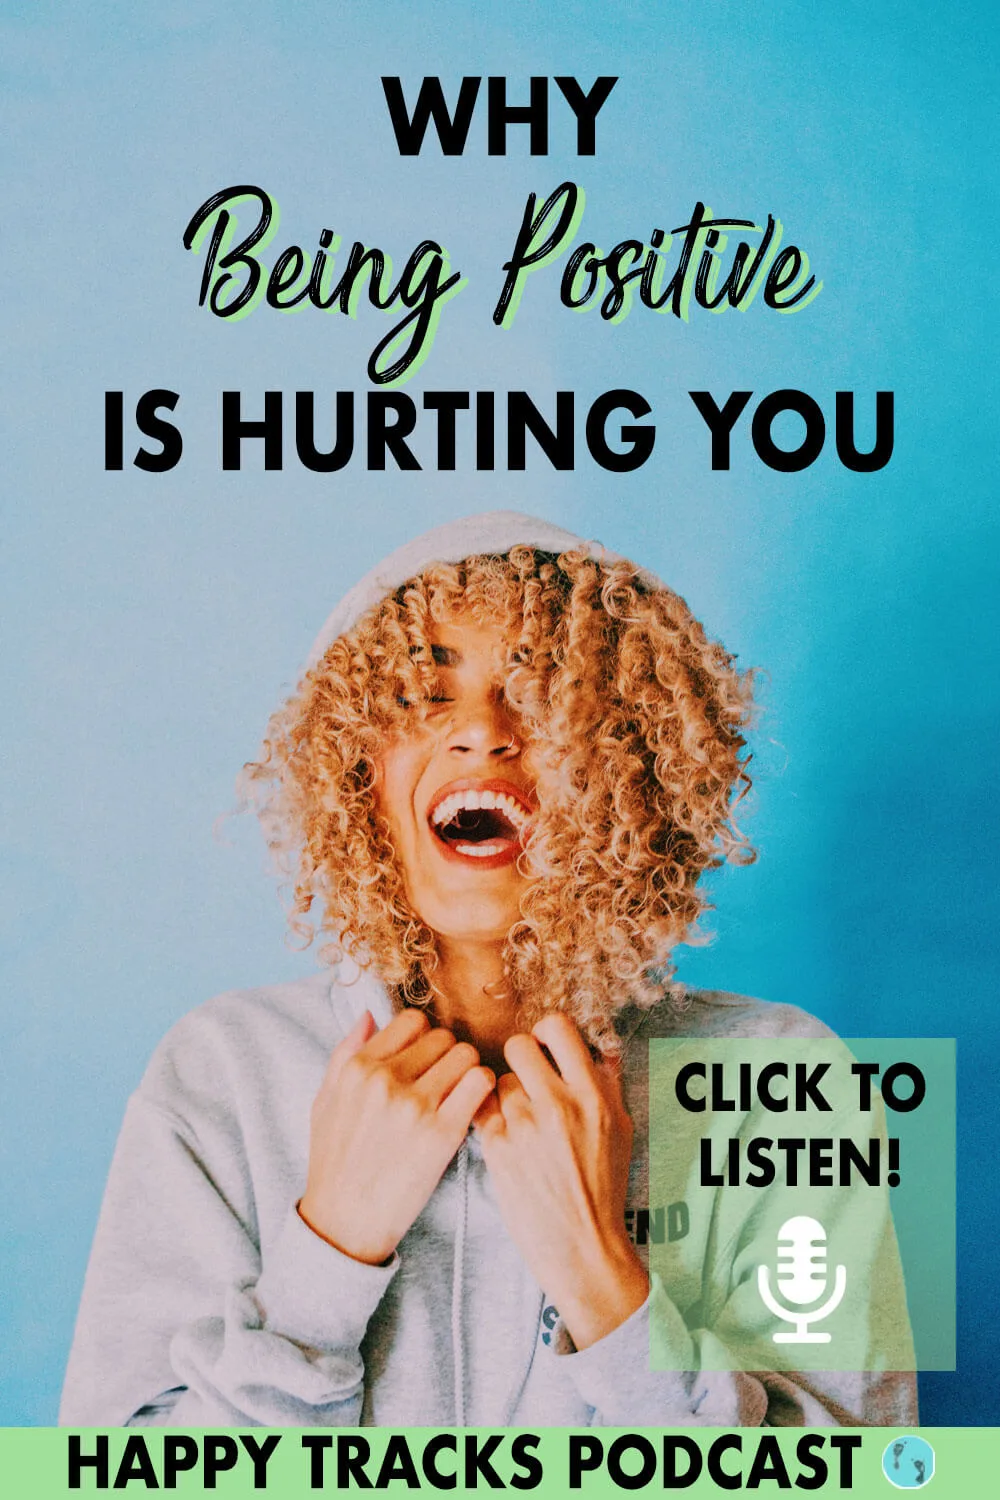 Could being positive actually be hurting you? It can be if it’s repressing negative emotions that need to come out. Learn how you can be a happier person, let go of negativity and live your best life. Click to find out the must-know mindset tips!